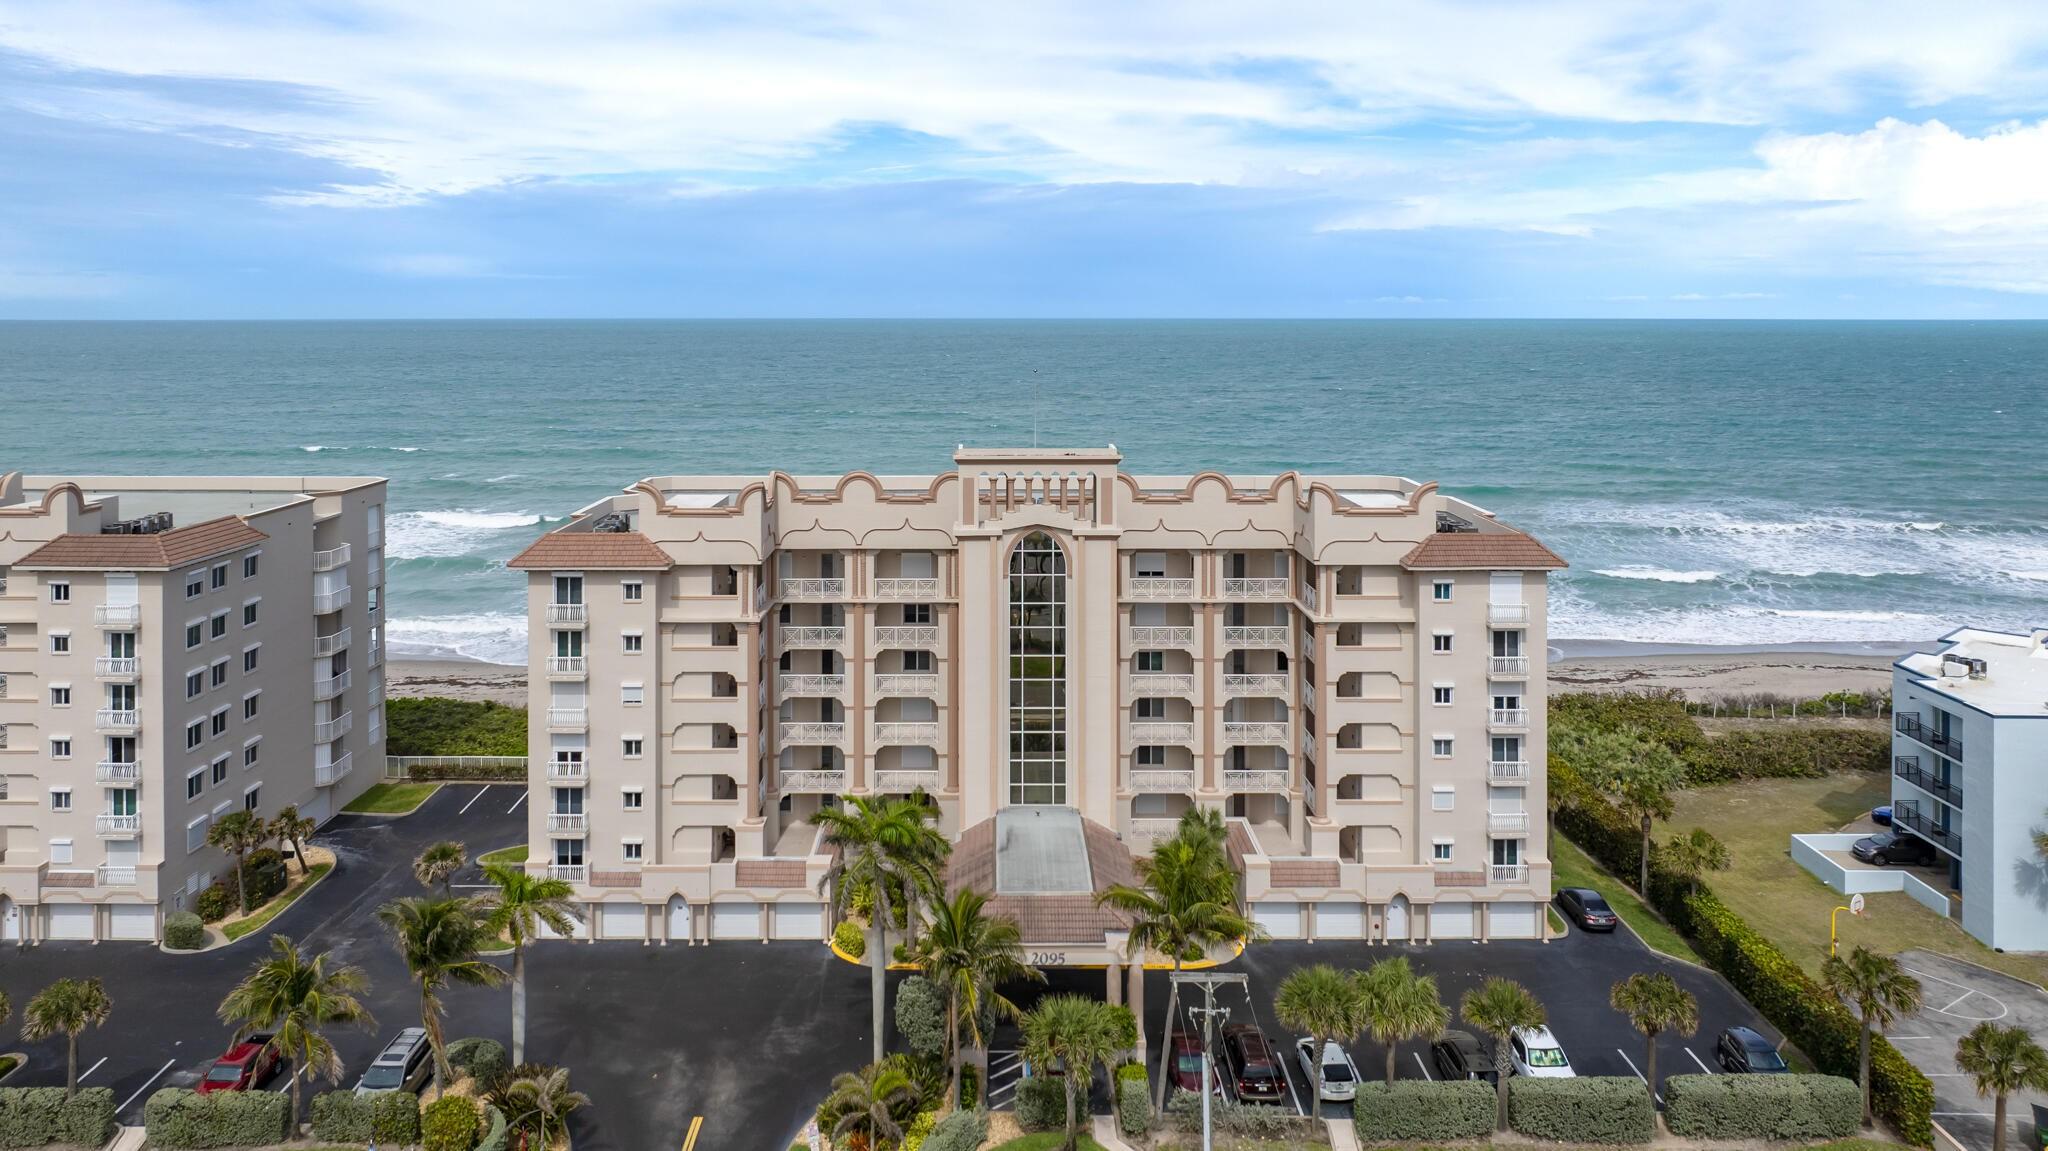 Property Image for 2095 Highway A1a 4502